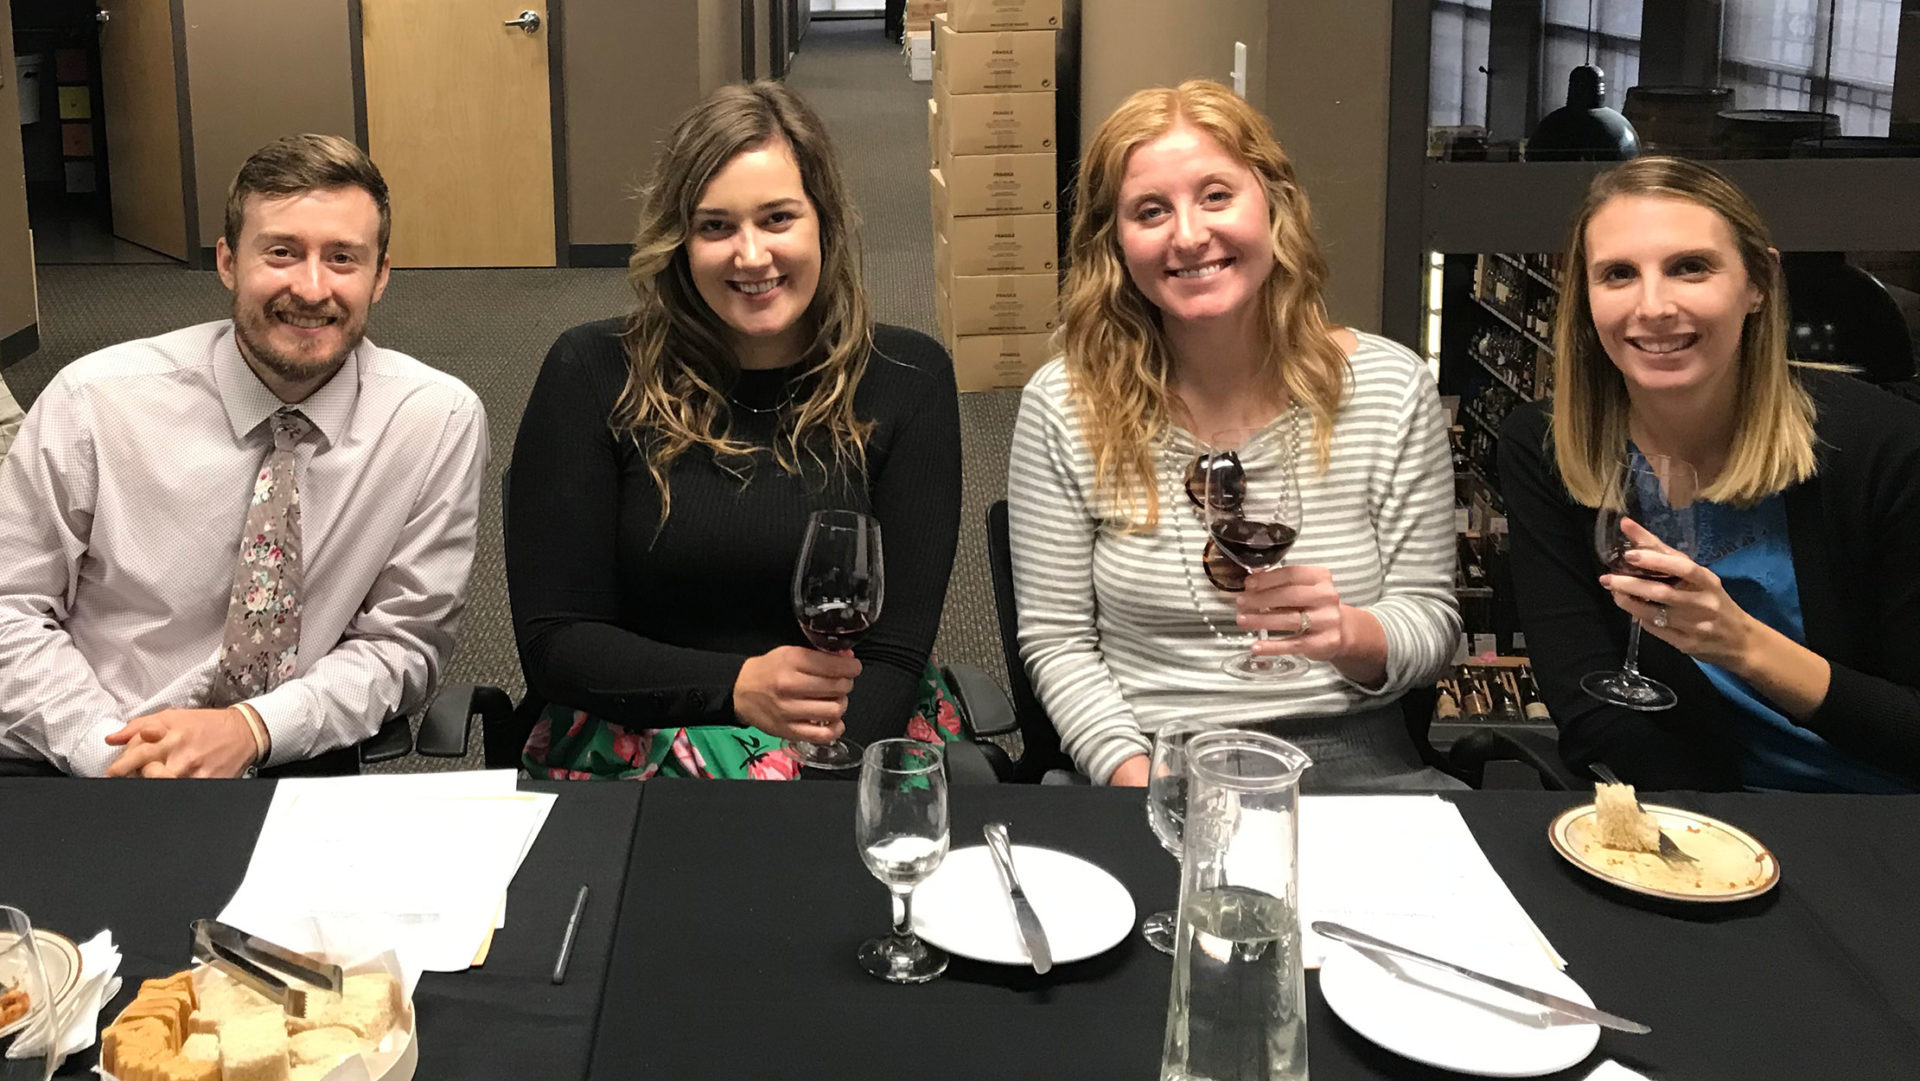 On Thursday, September 26, employees from the St. Louis office participated in their latest employee engagement event: a pasta and wine pairing!